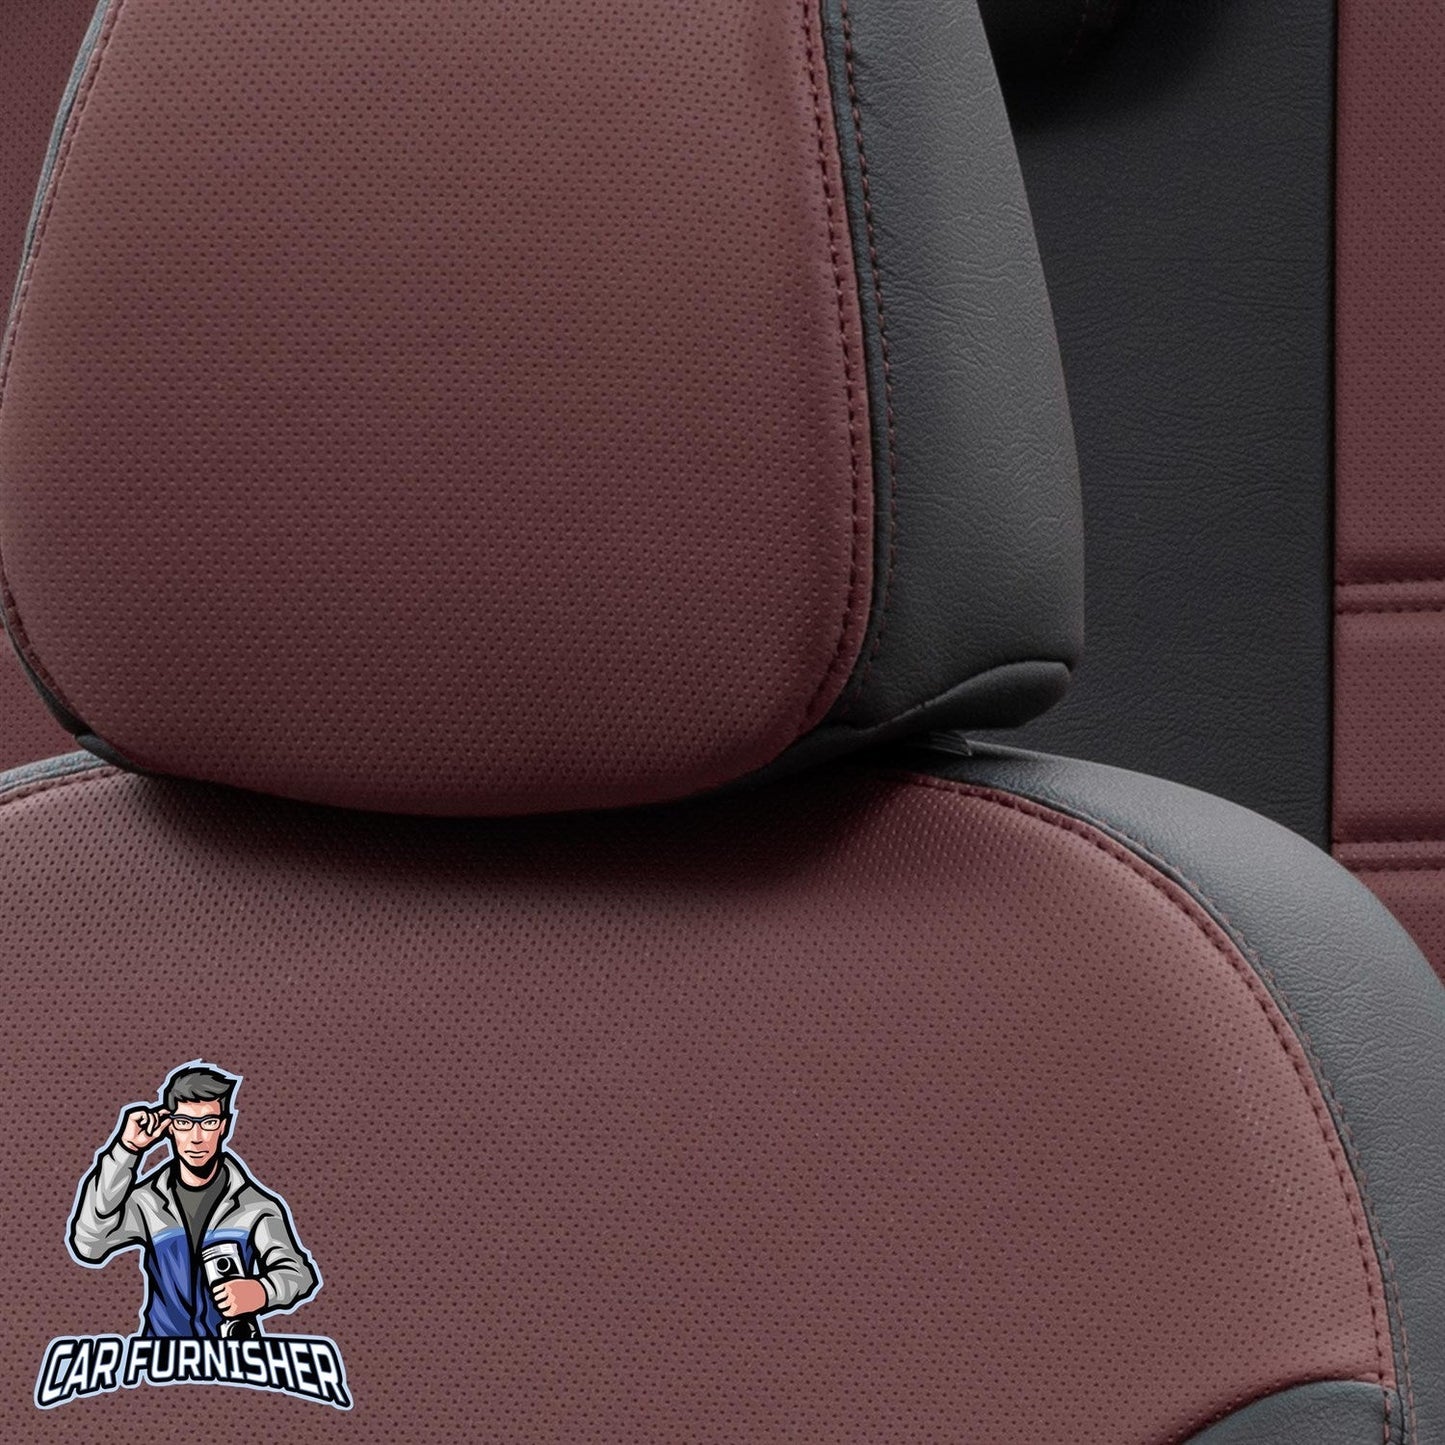 Bmw 1 Series Seat Cover Istanbul Leather Design Burgundy Leather